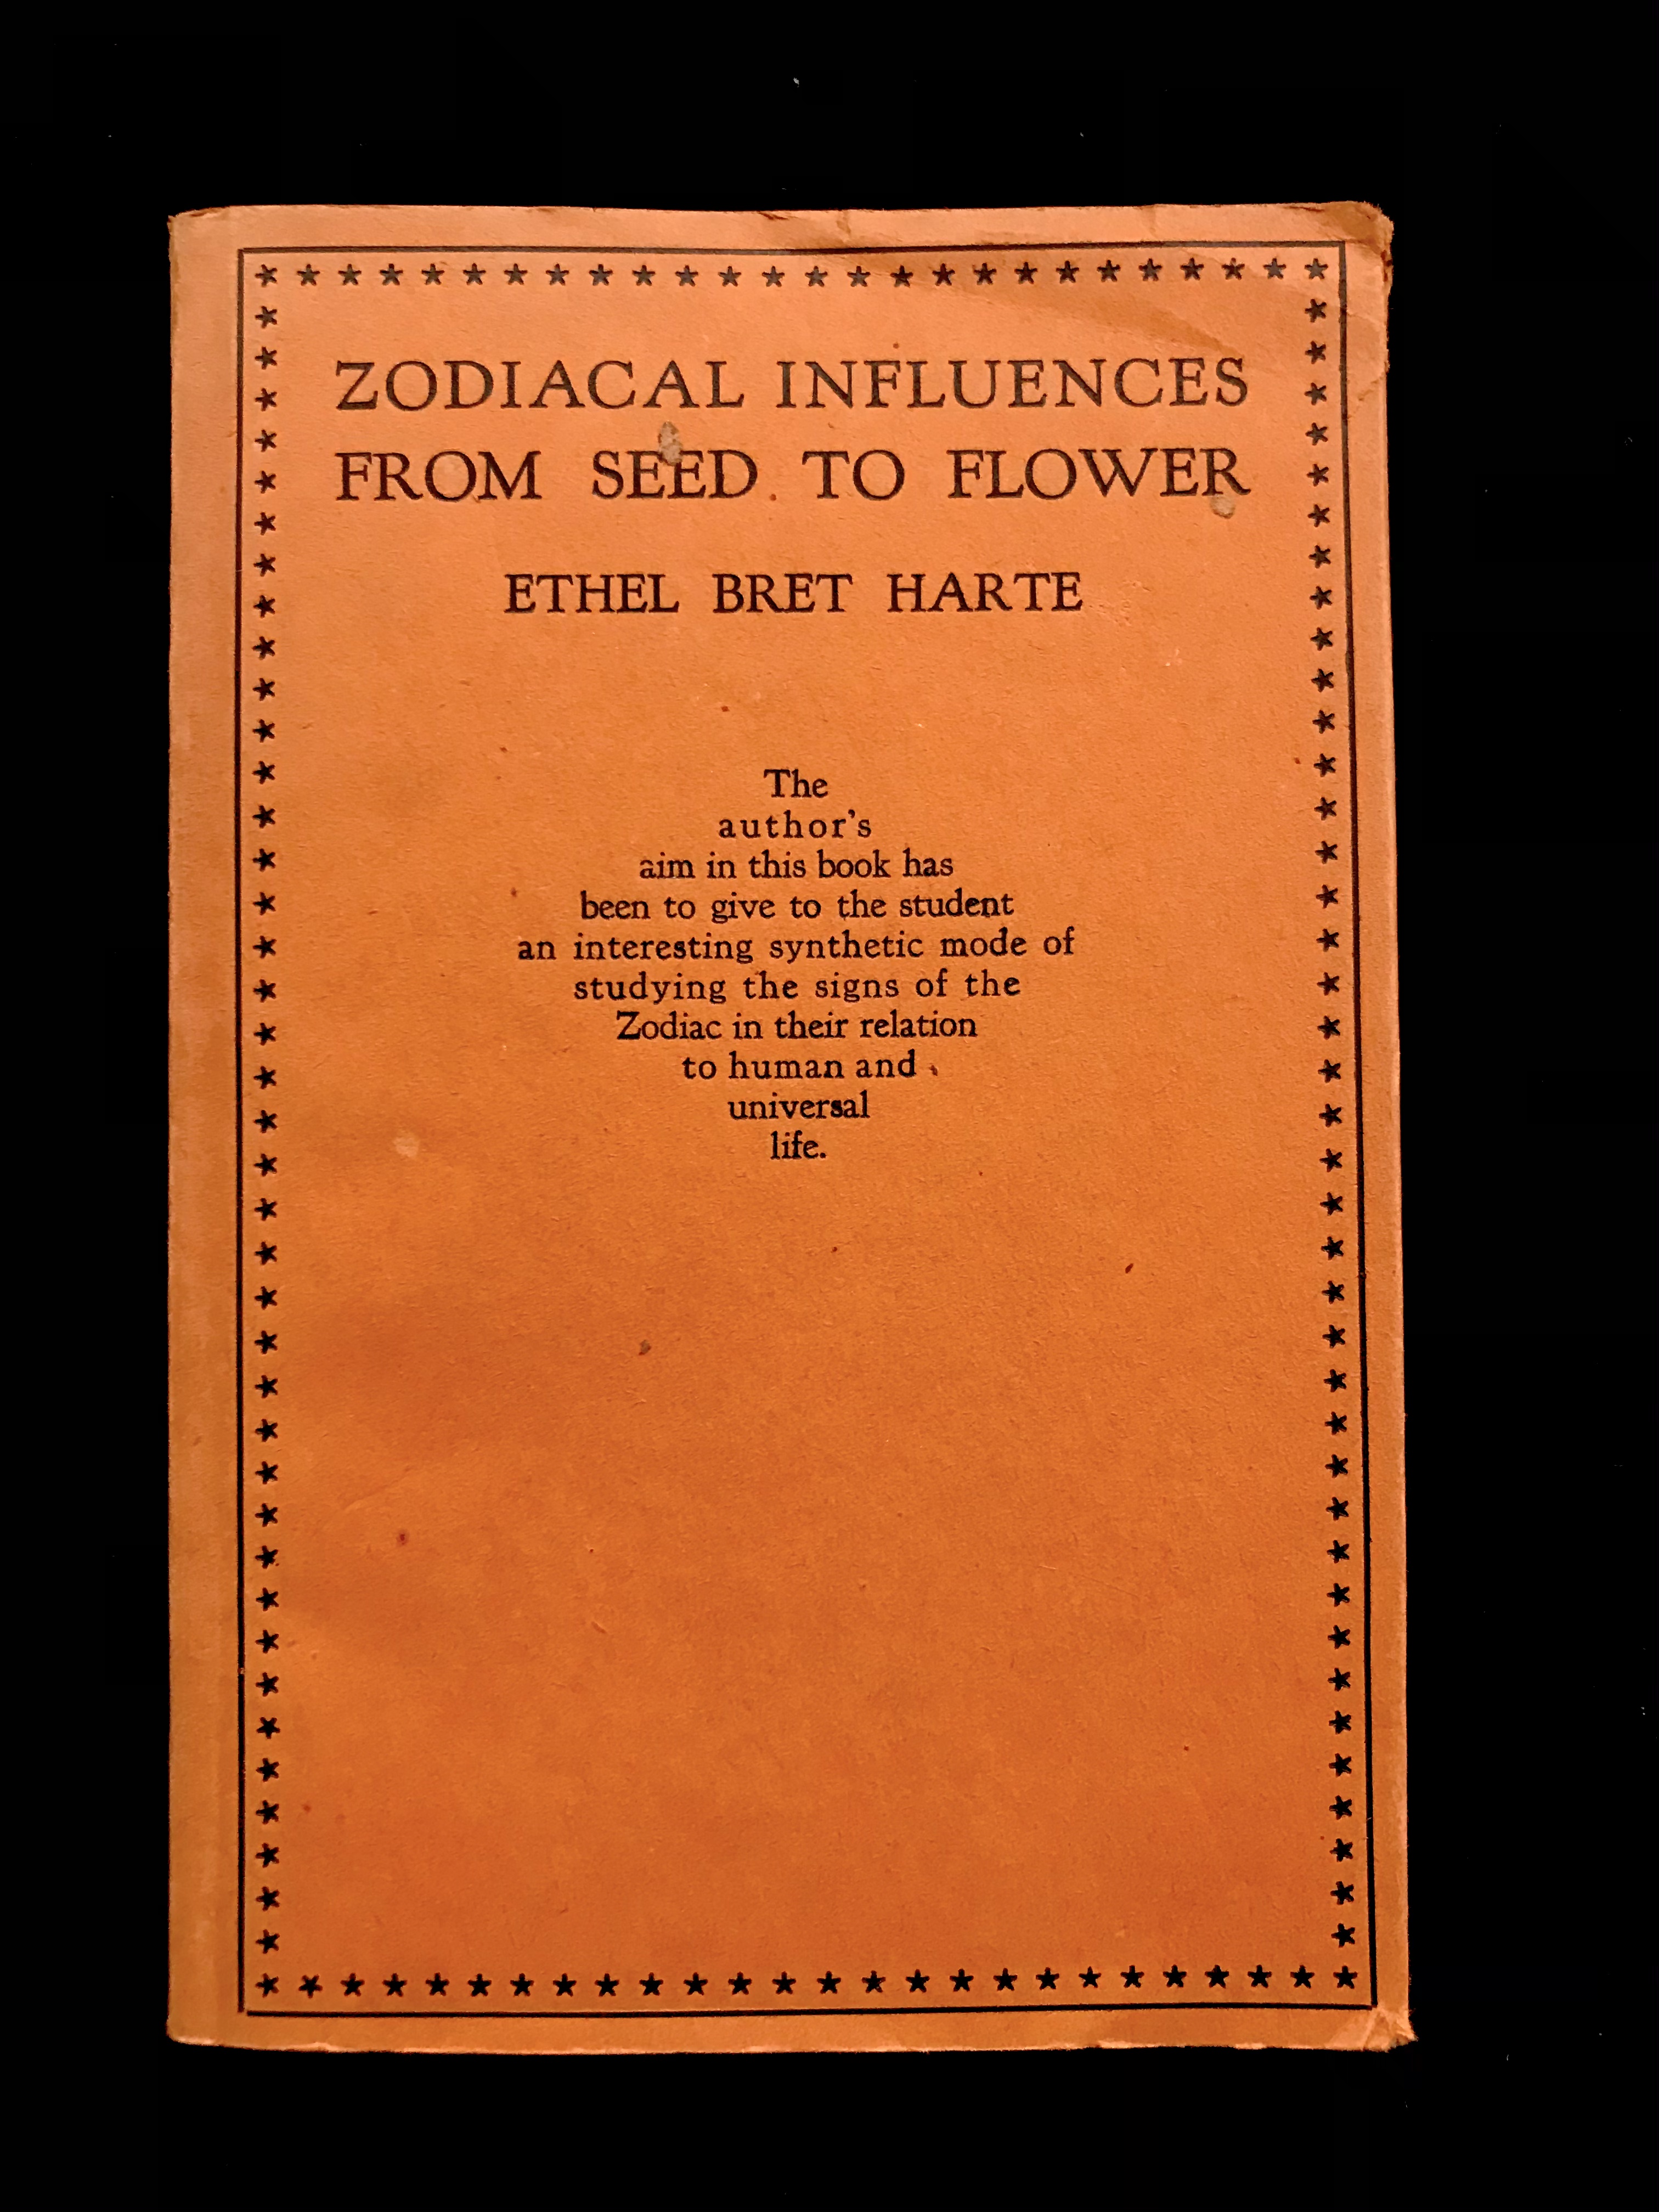 Zodiacal Influences From Seed To Flower by Ethel Bret Harte